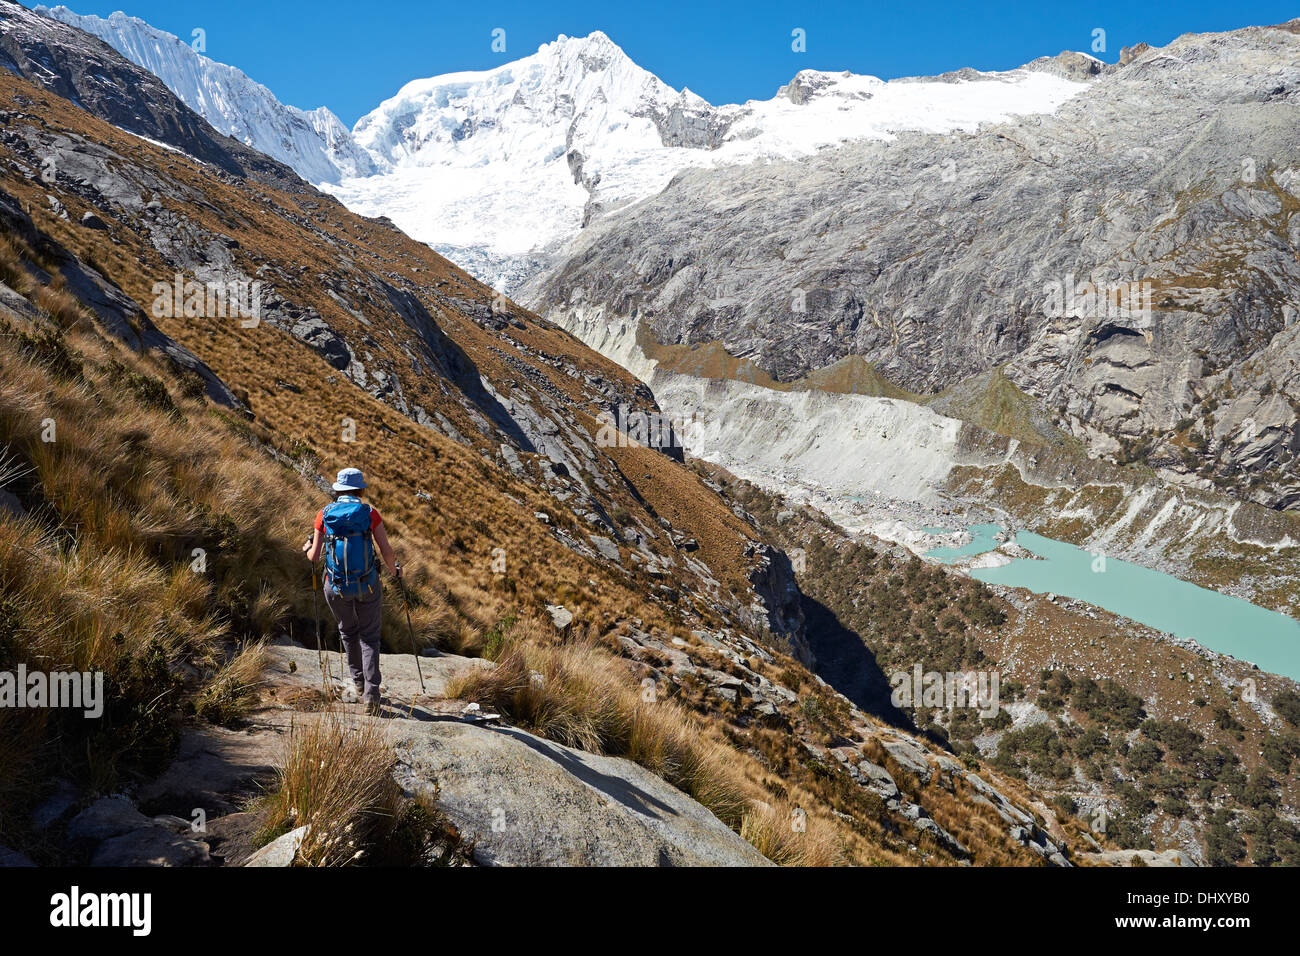 A femle hiker descending to the Llaca valley in the Peruvian Andes, South America. Stock Photo